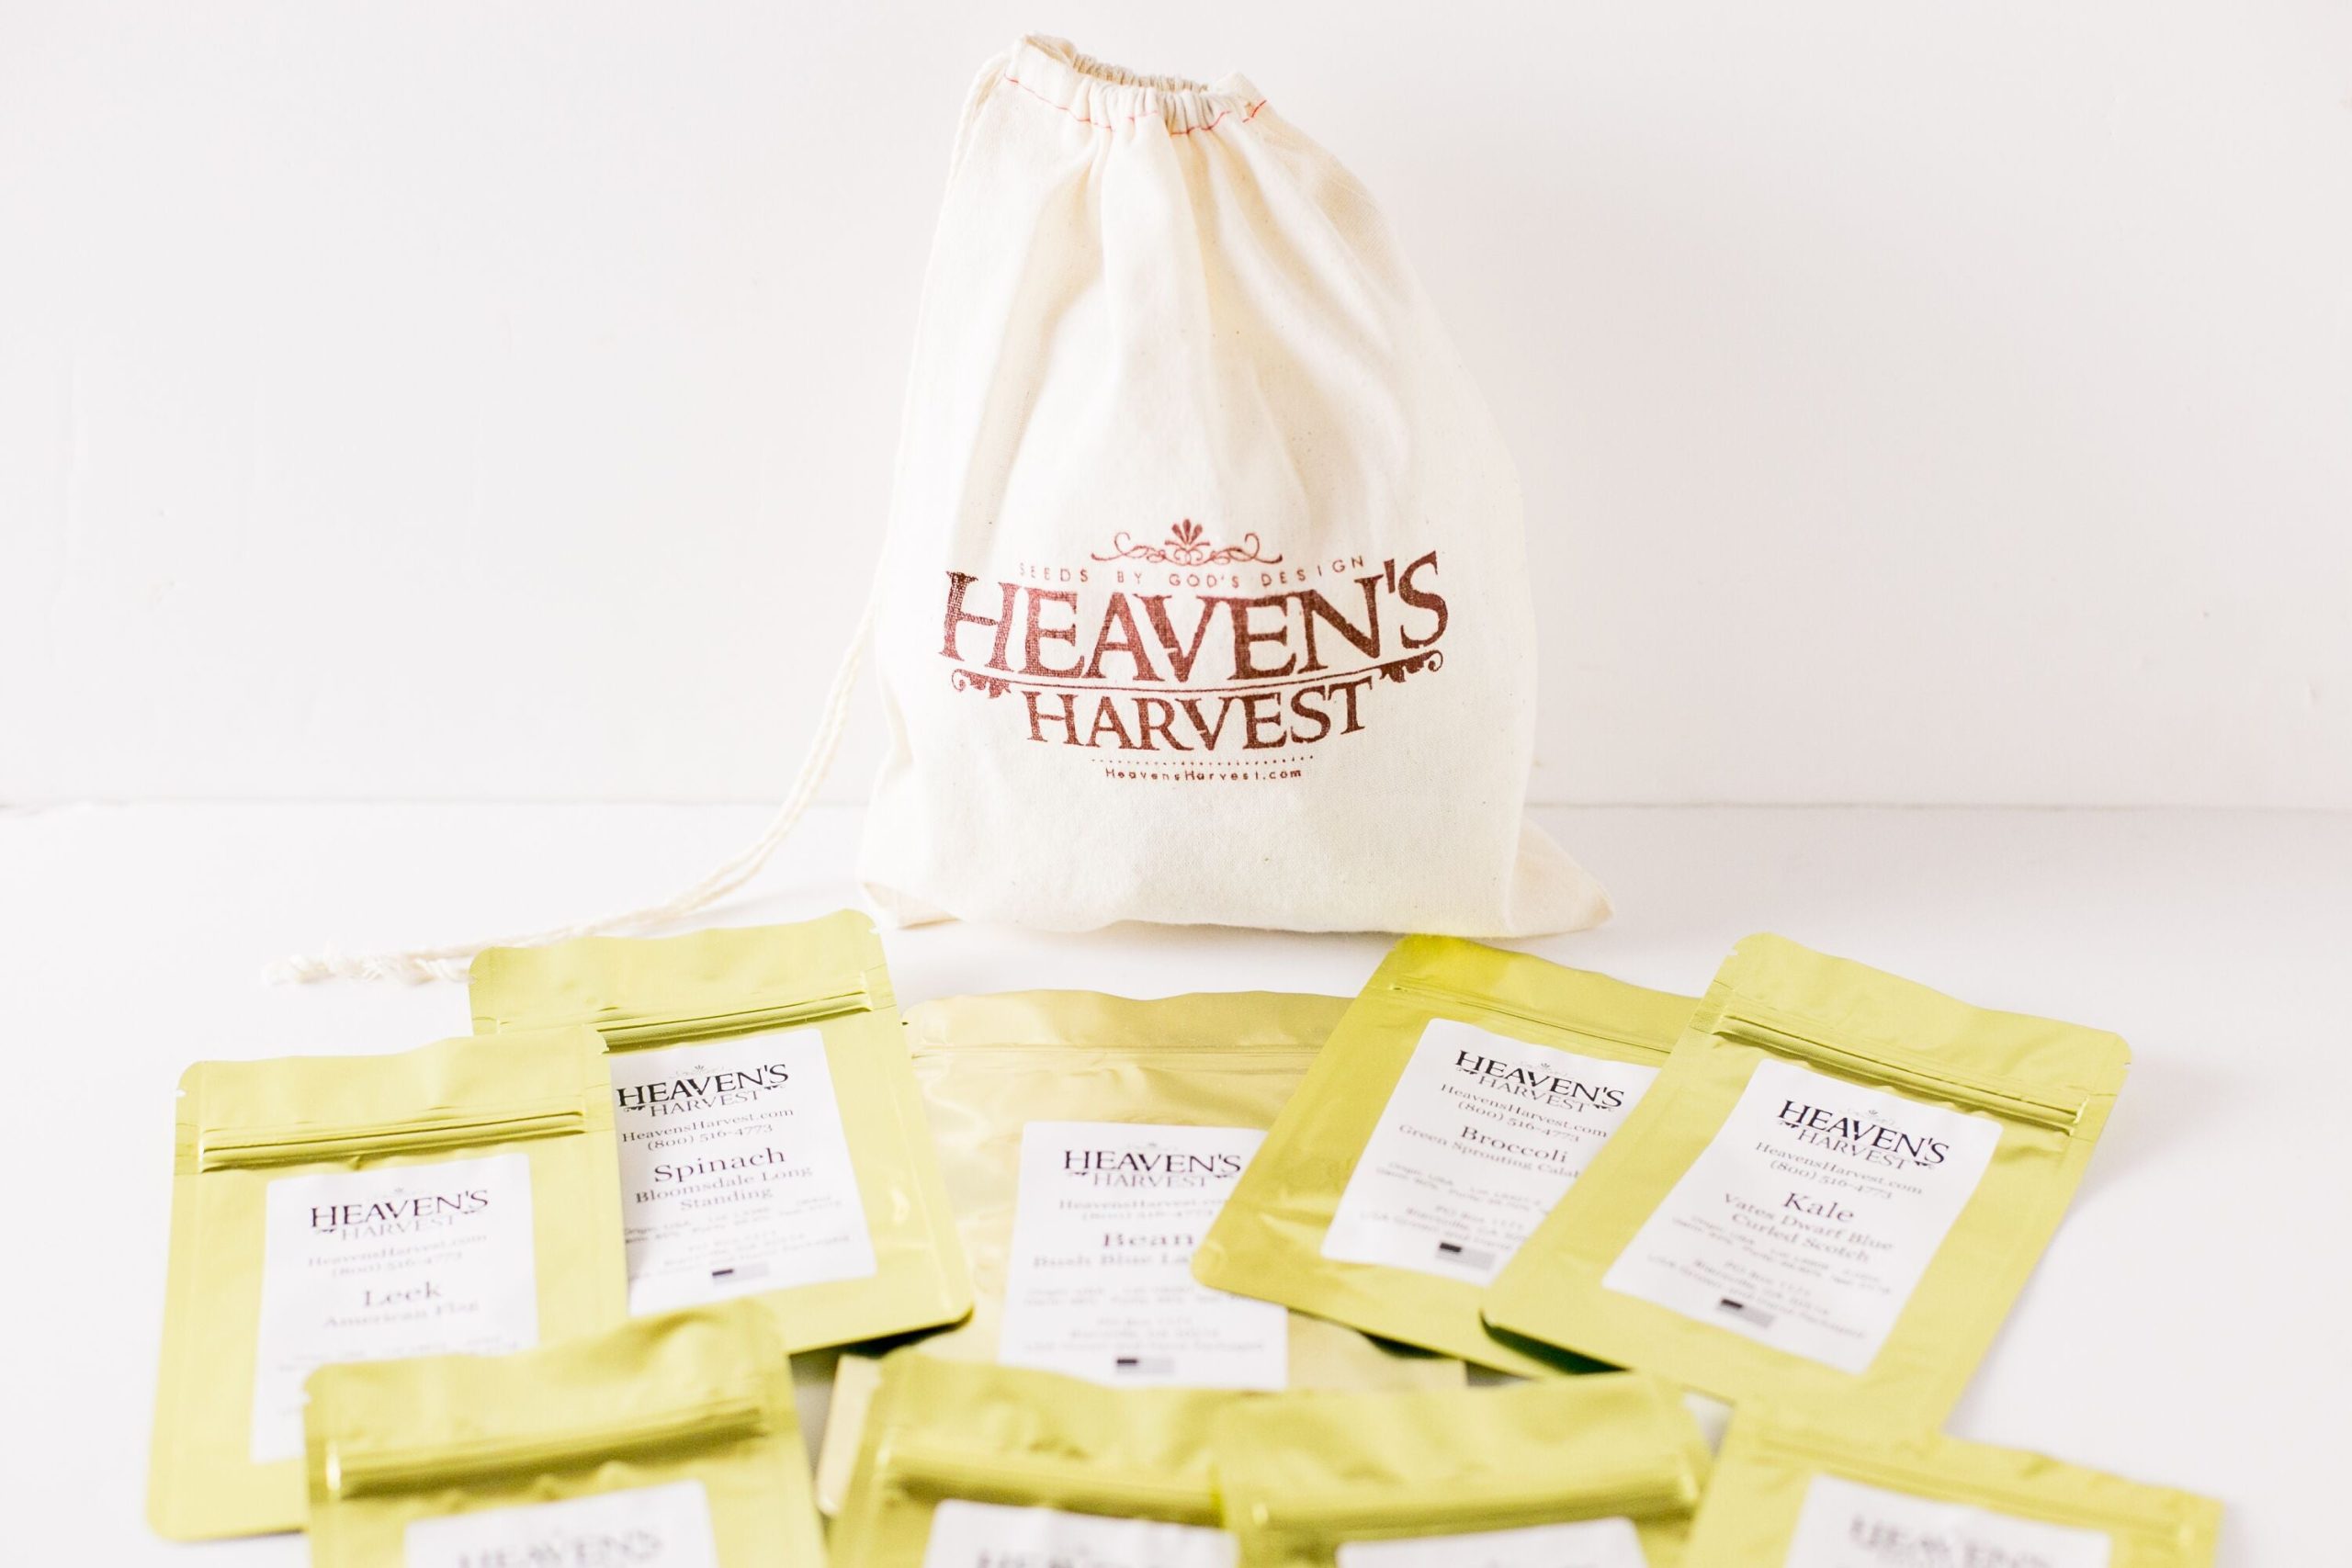 Heaven's Harvest tea bag infused with artisan herbs from the Heirloom Seed Kit.